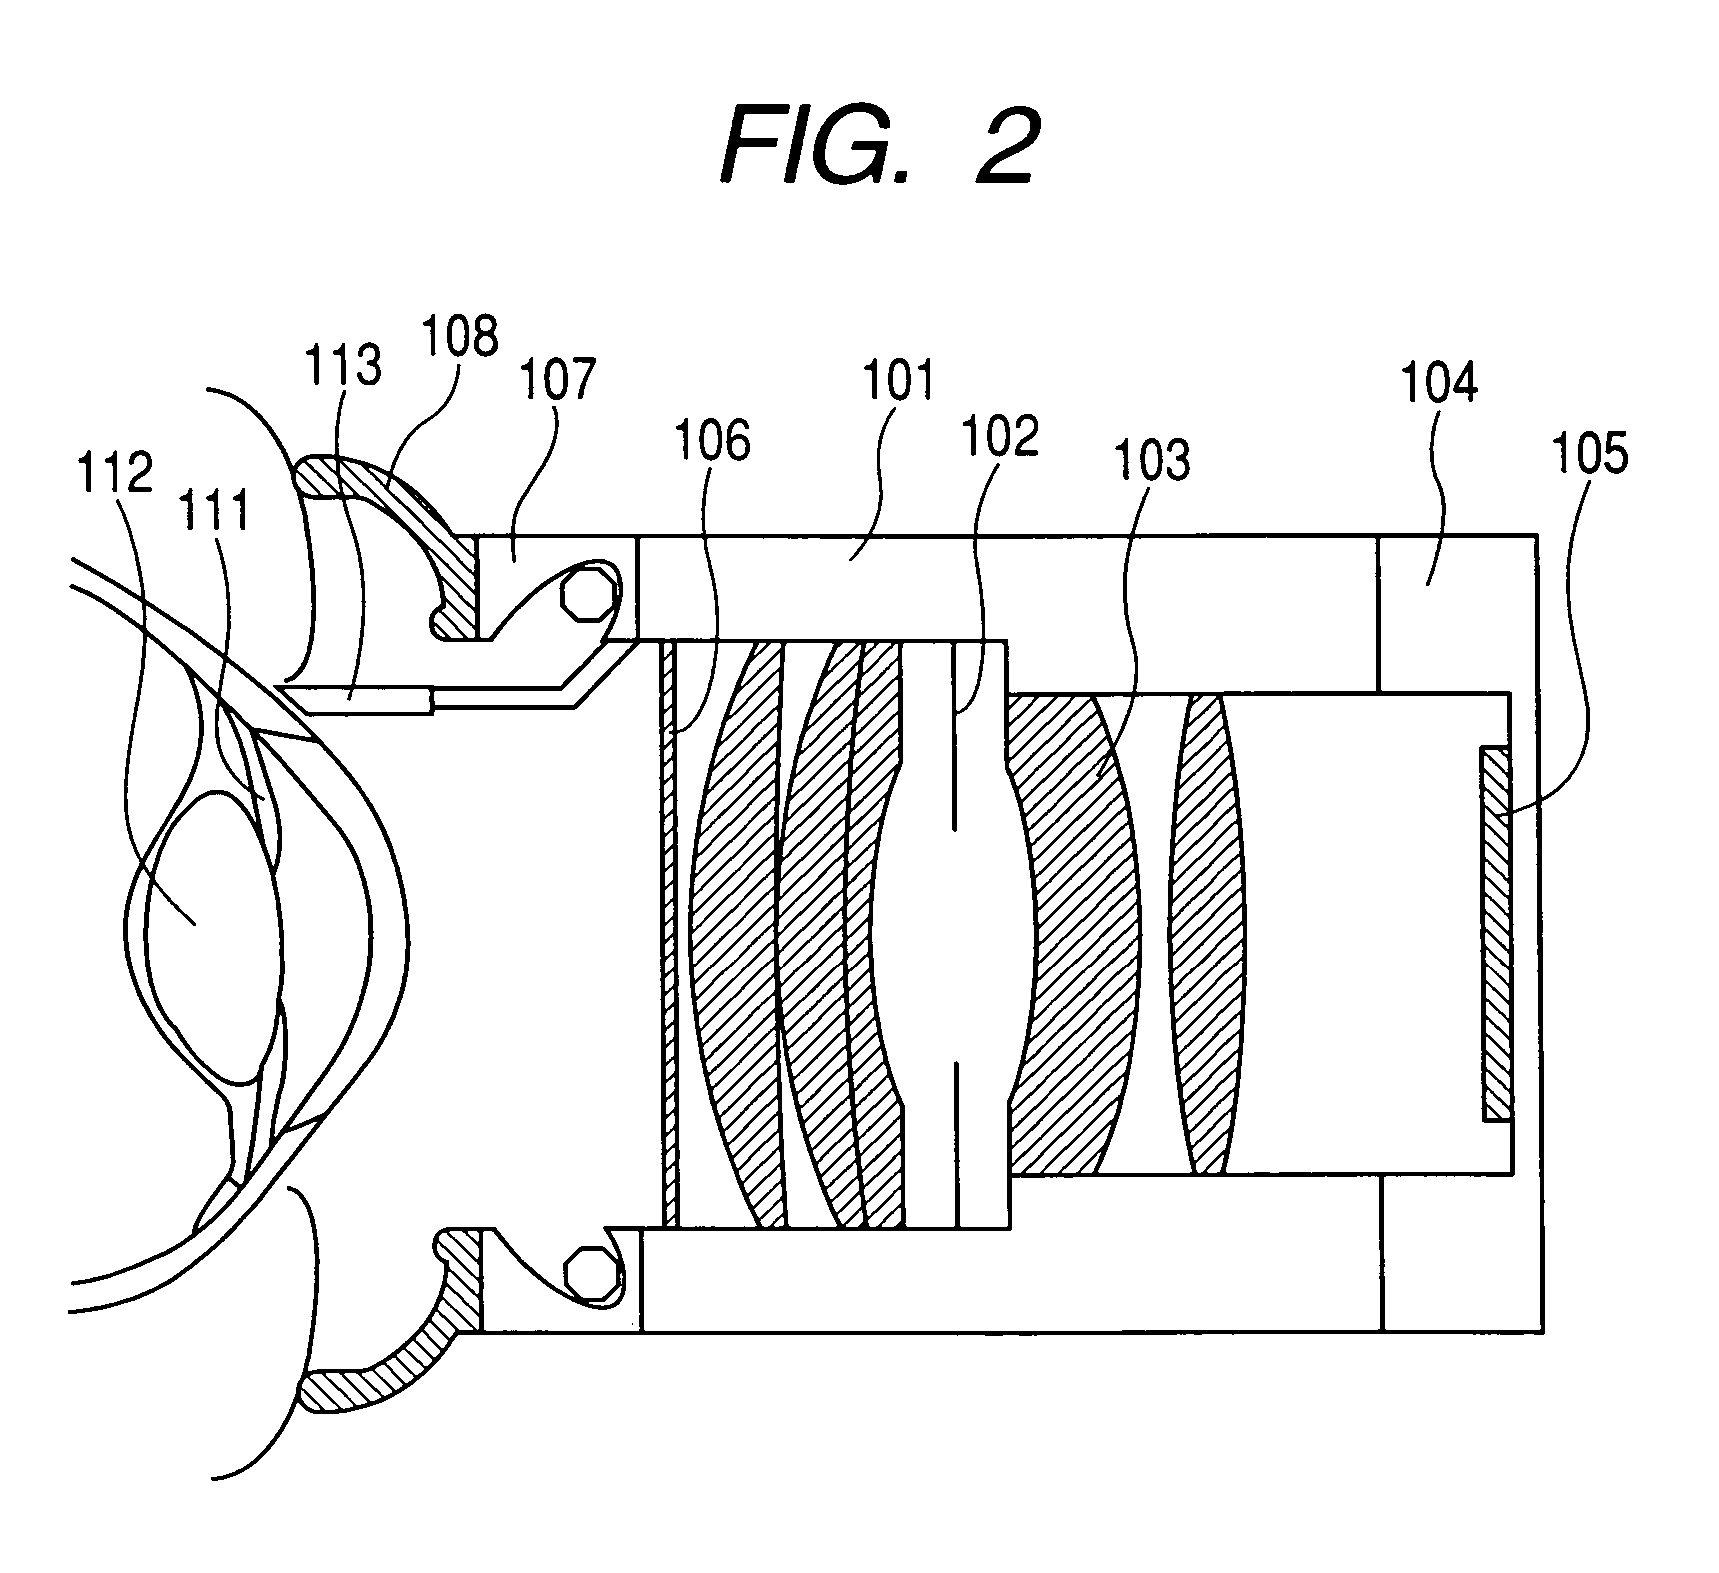 Detection apparatus for detecting an amount of an object of analysis in a fluid present in an eye or on an eye surface